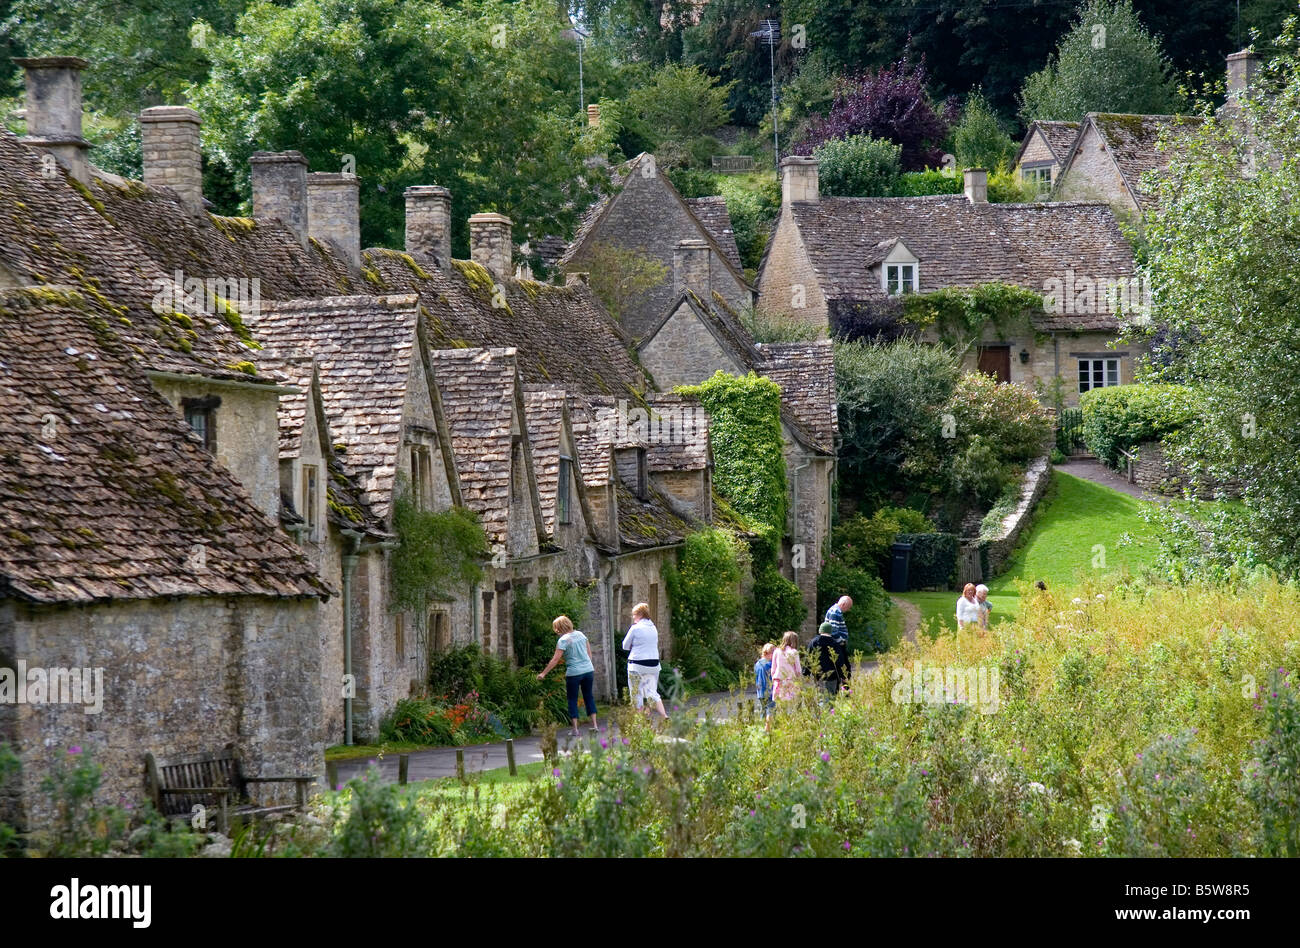 Cotswold stone cottages in the village of Bibury Gloucestershire England Stock Photo